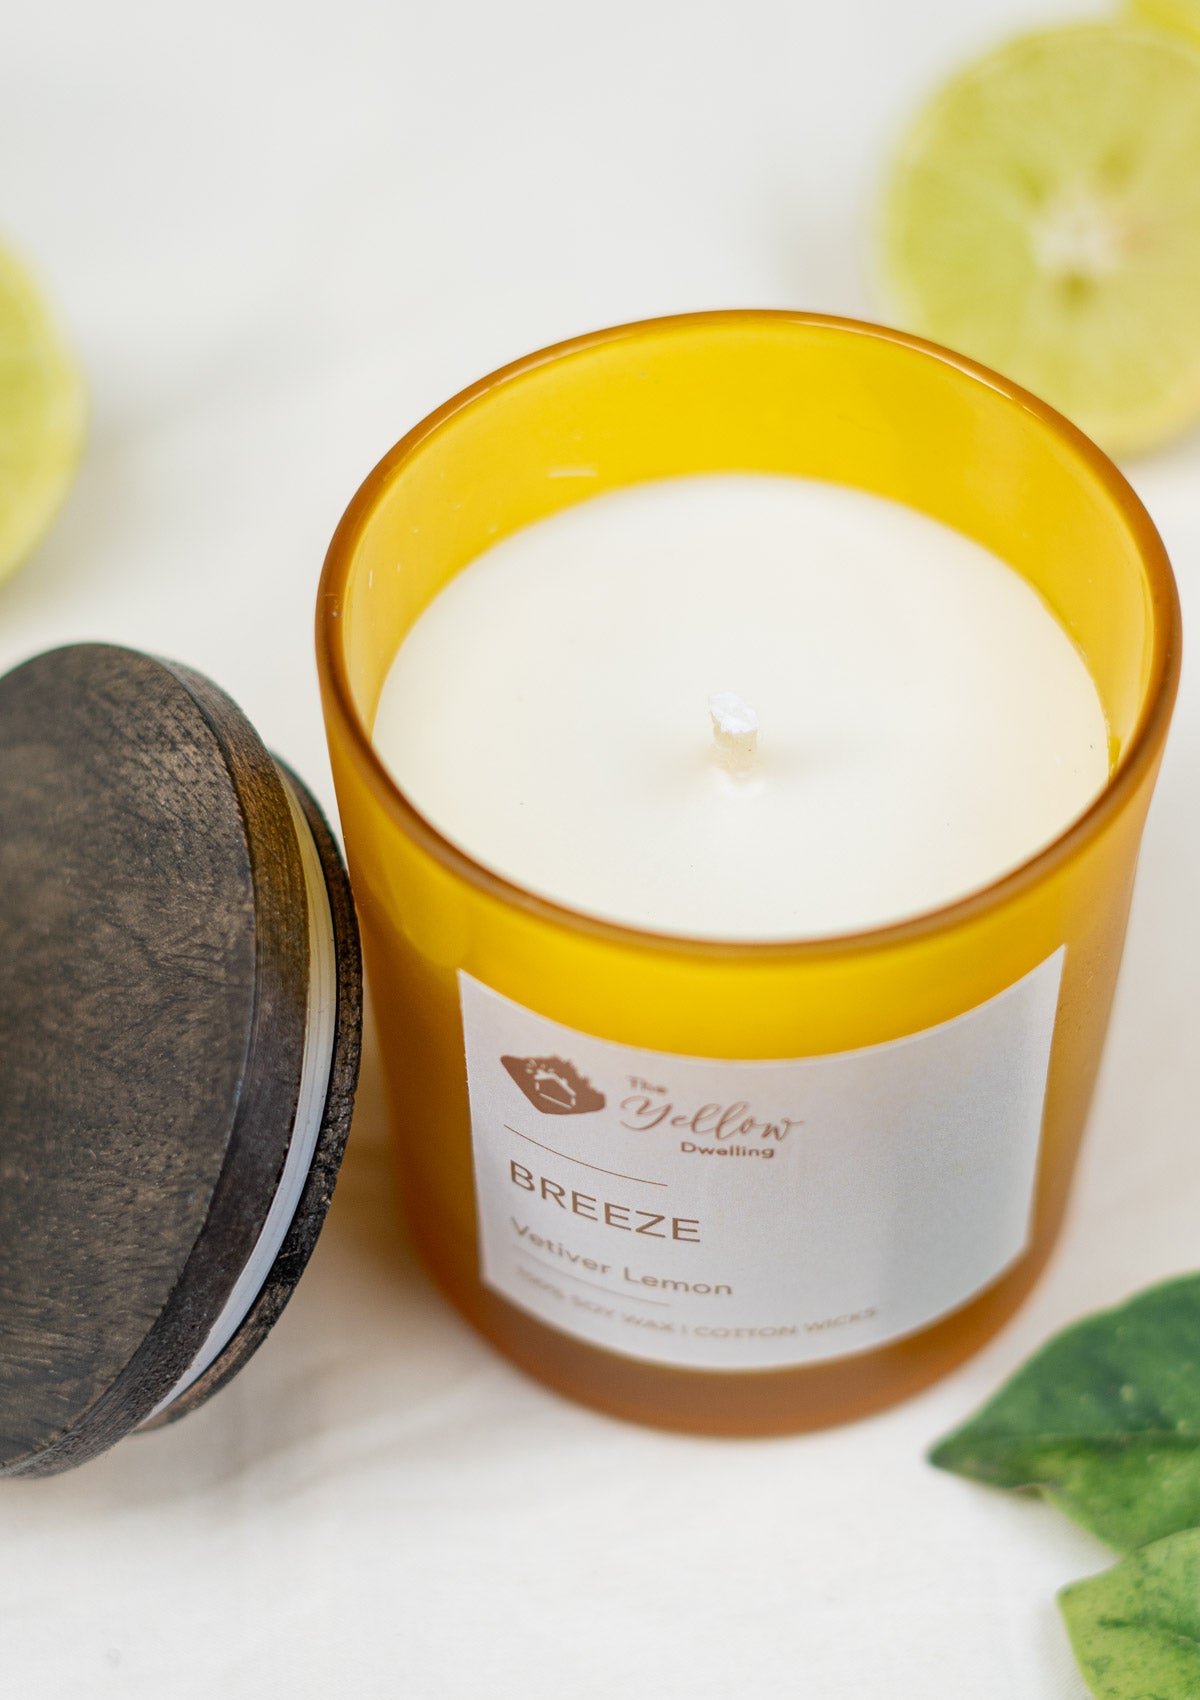 Breeze scented candle